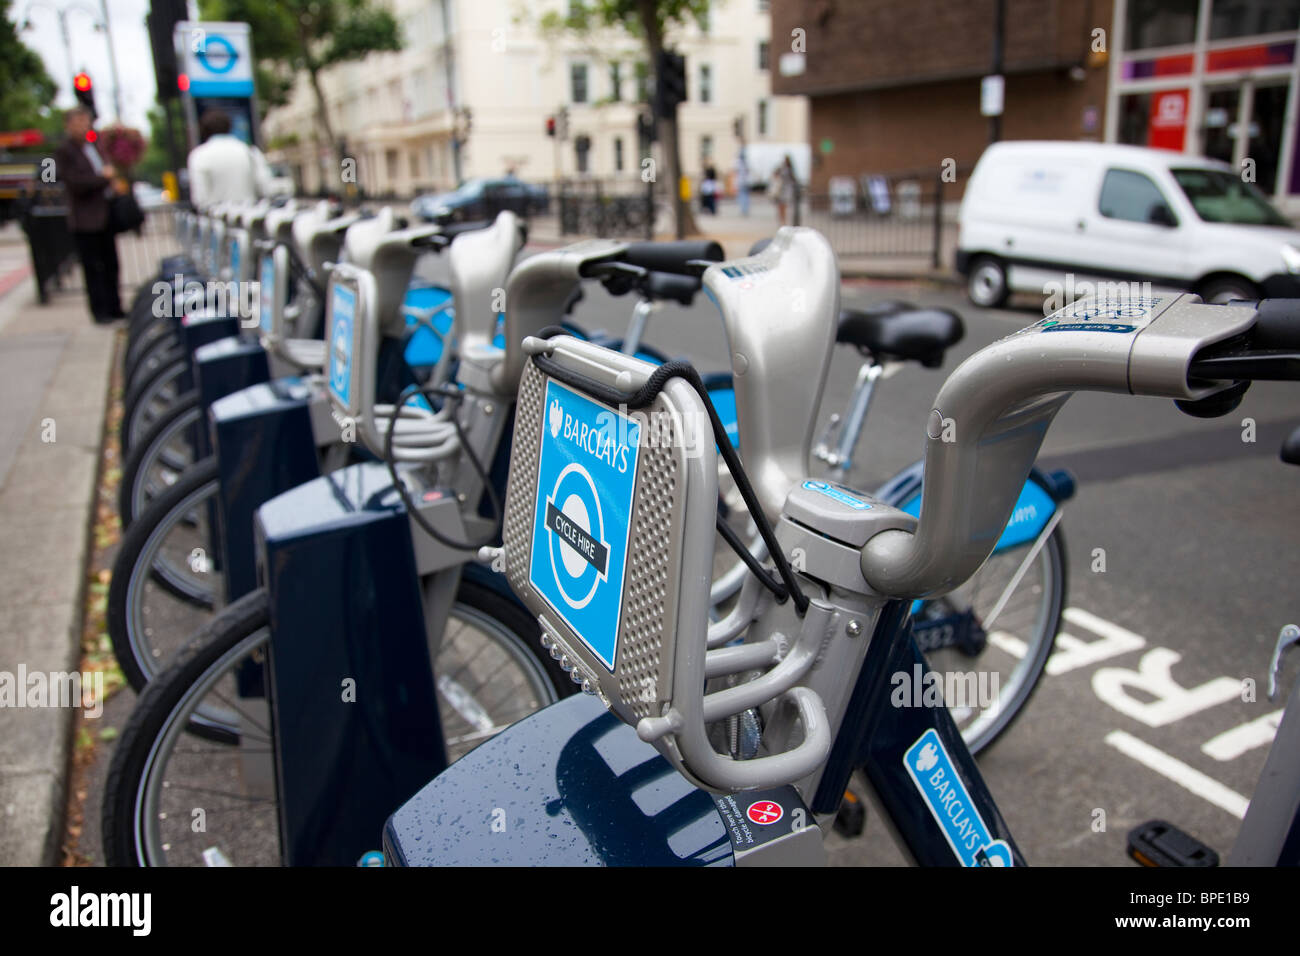 Hire bike docking station on Queen's Gate, South Kensington. Part of the Transport for London bicycle hire scheme. London UK Stock Photo